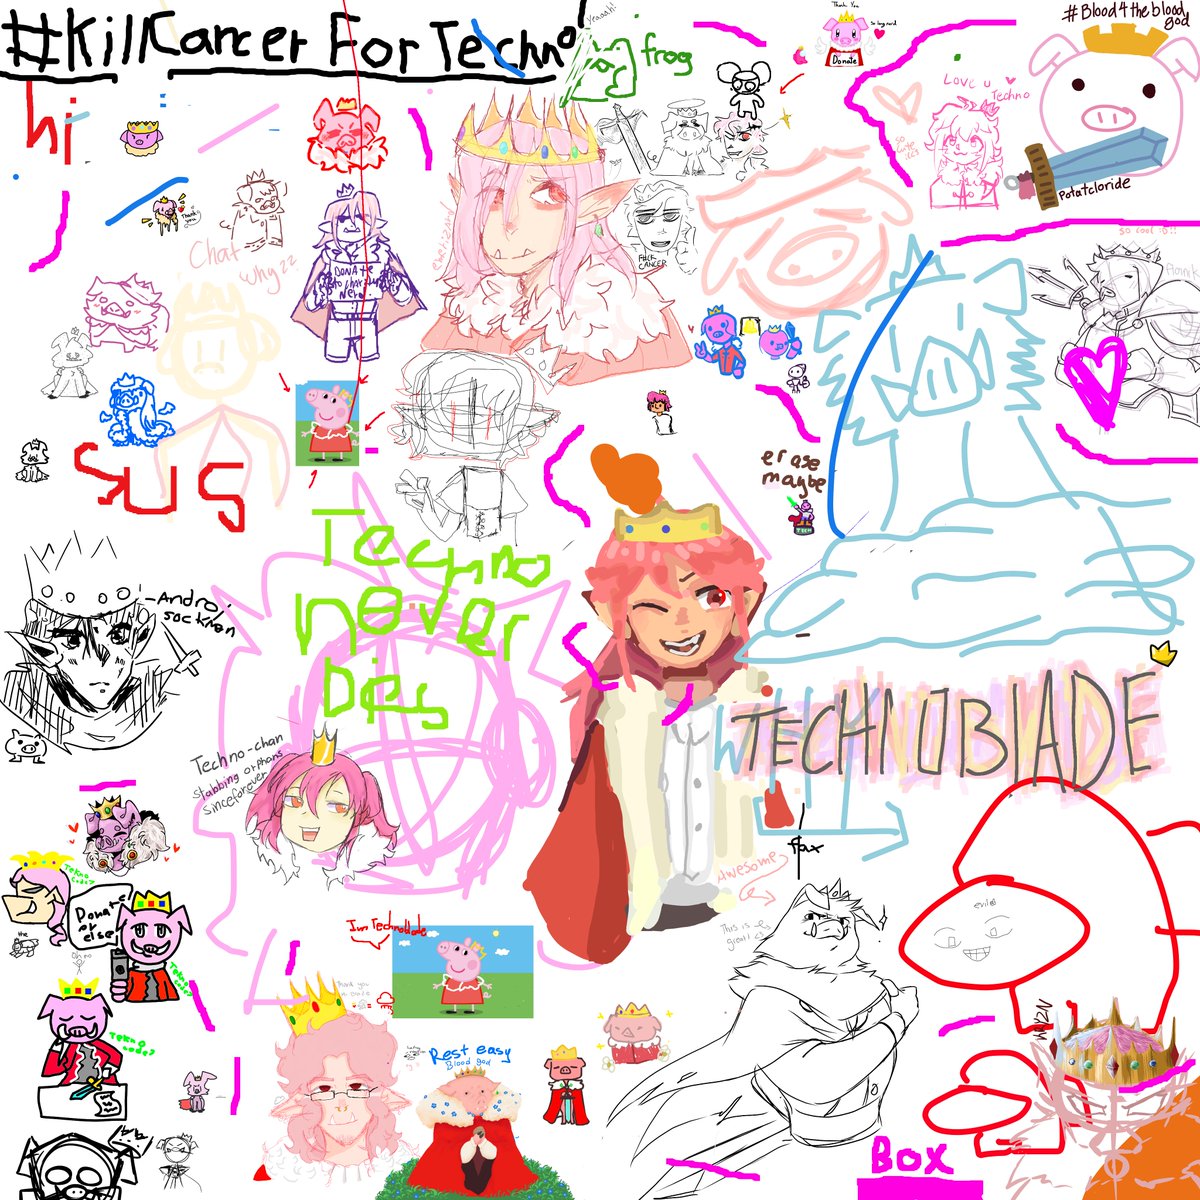 THE MURALS THAT WE DID ON THE AGGIE SEGMENTS OF THE STREM FOR OUR KING @Technothepig!!!

THANK YOU ALL TO THE WONDERFUL ARTISTS (and chat) WHO PARTICIPATED!!!!!

#technobladeneverdies #technobladefanart #KillCancerForTechno 